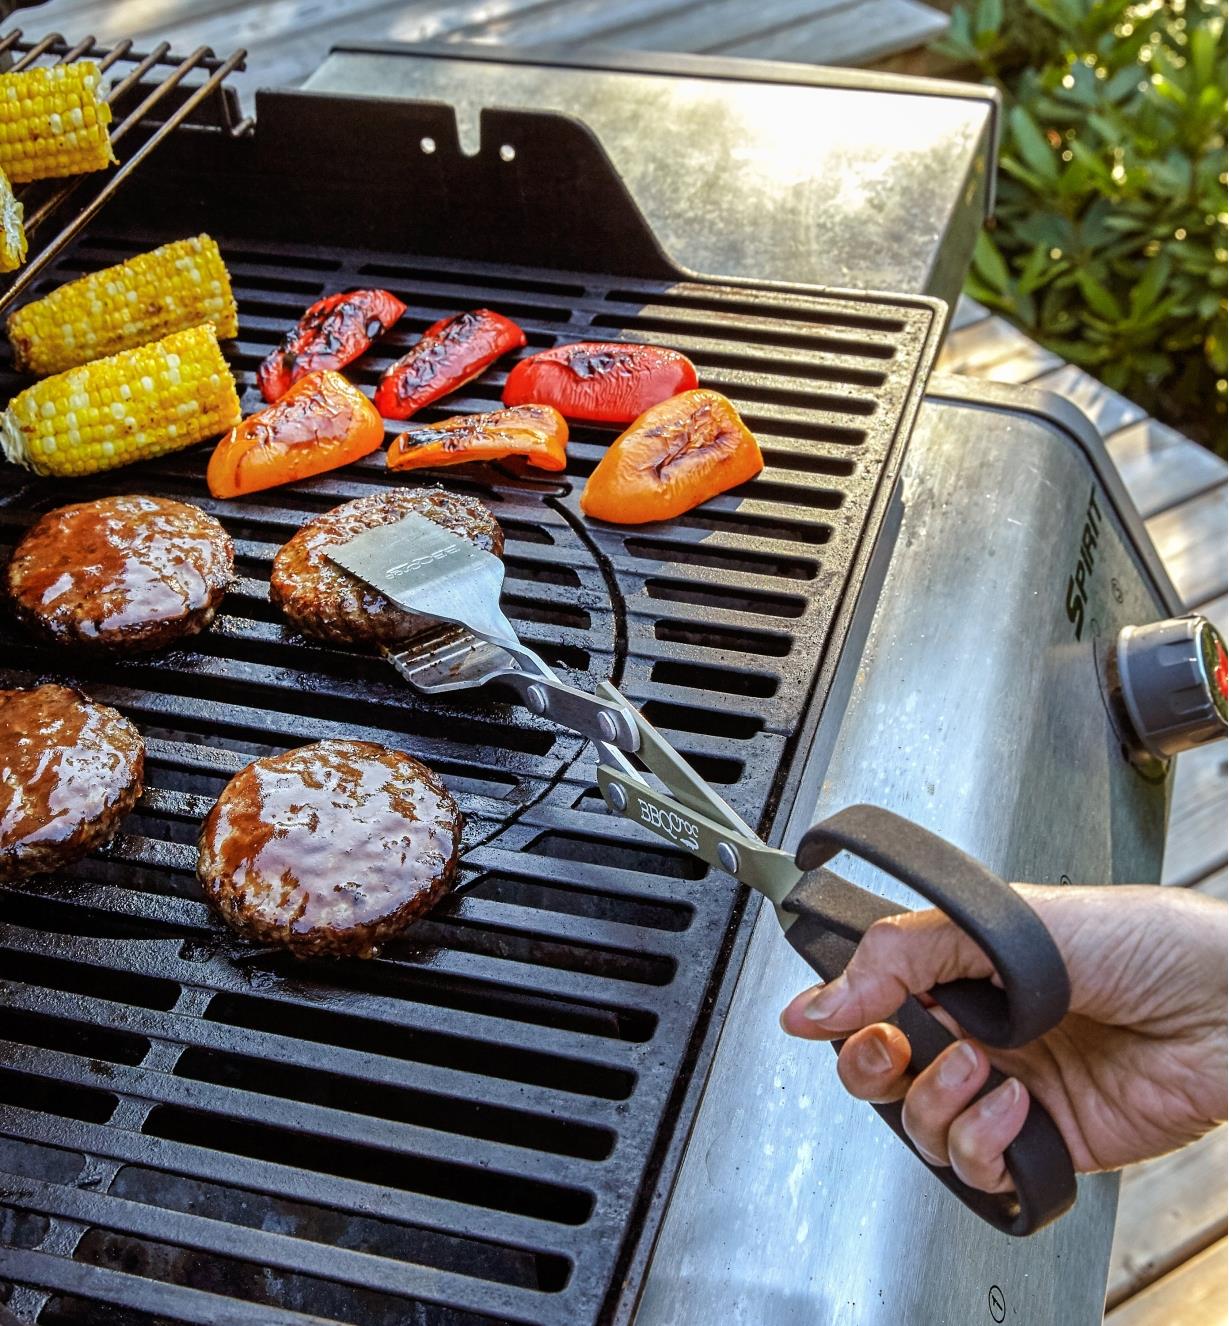 BBQ Croc tongs picking up a hamburger in the center of a grill